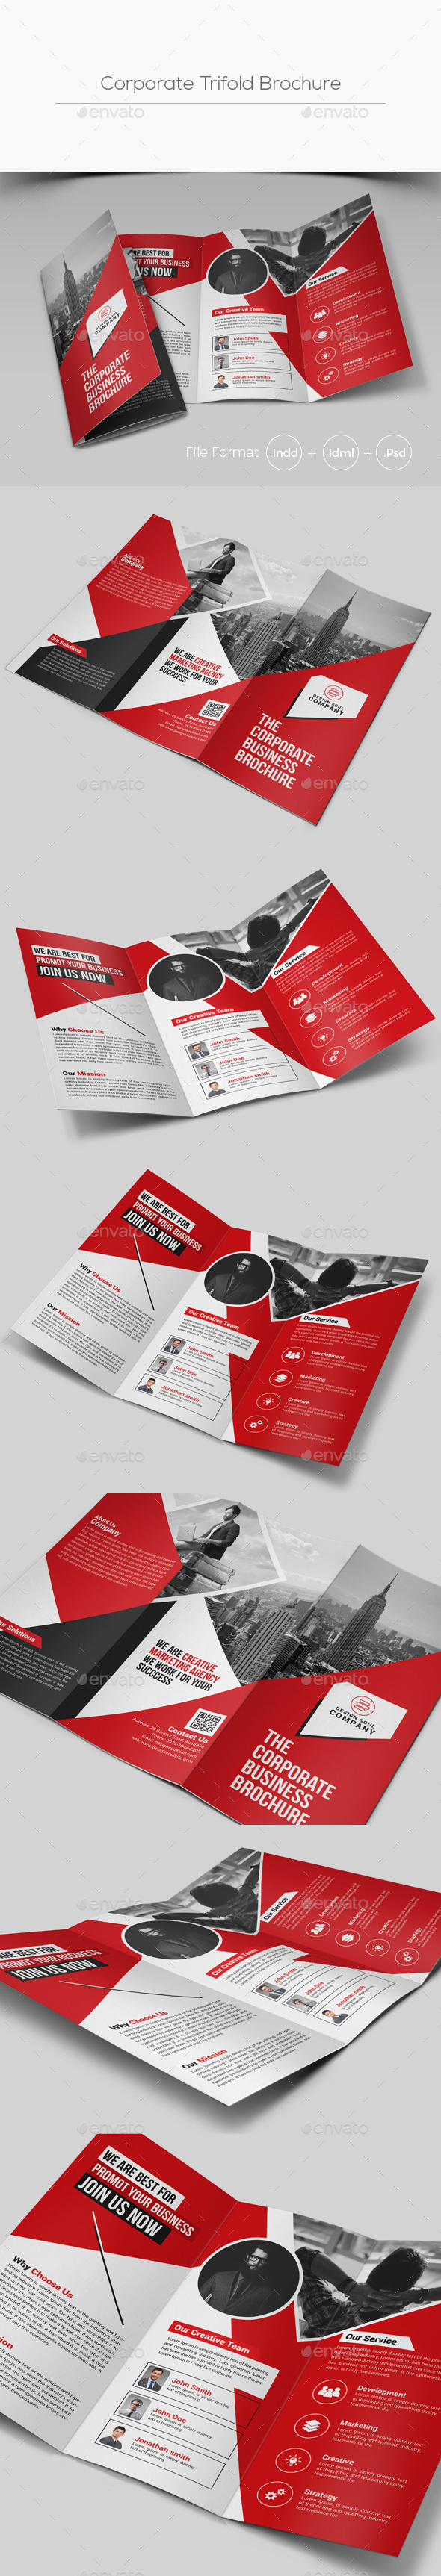  Trifold Brochure 